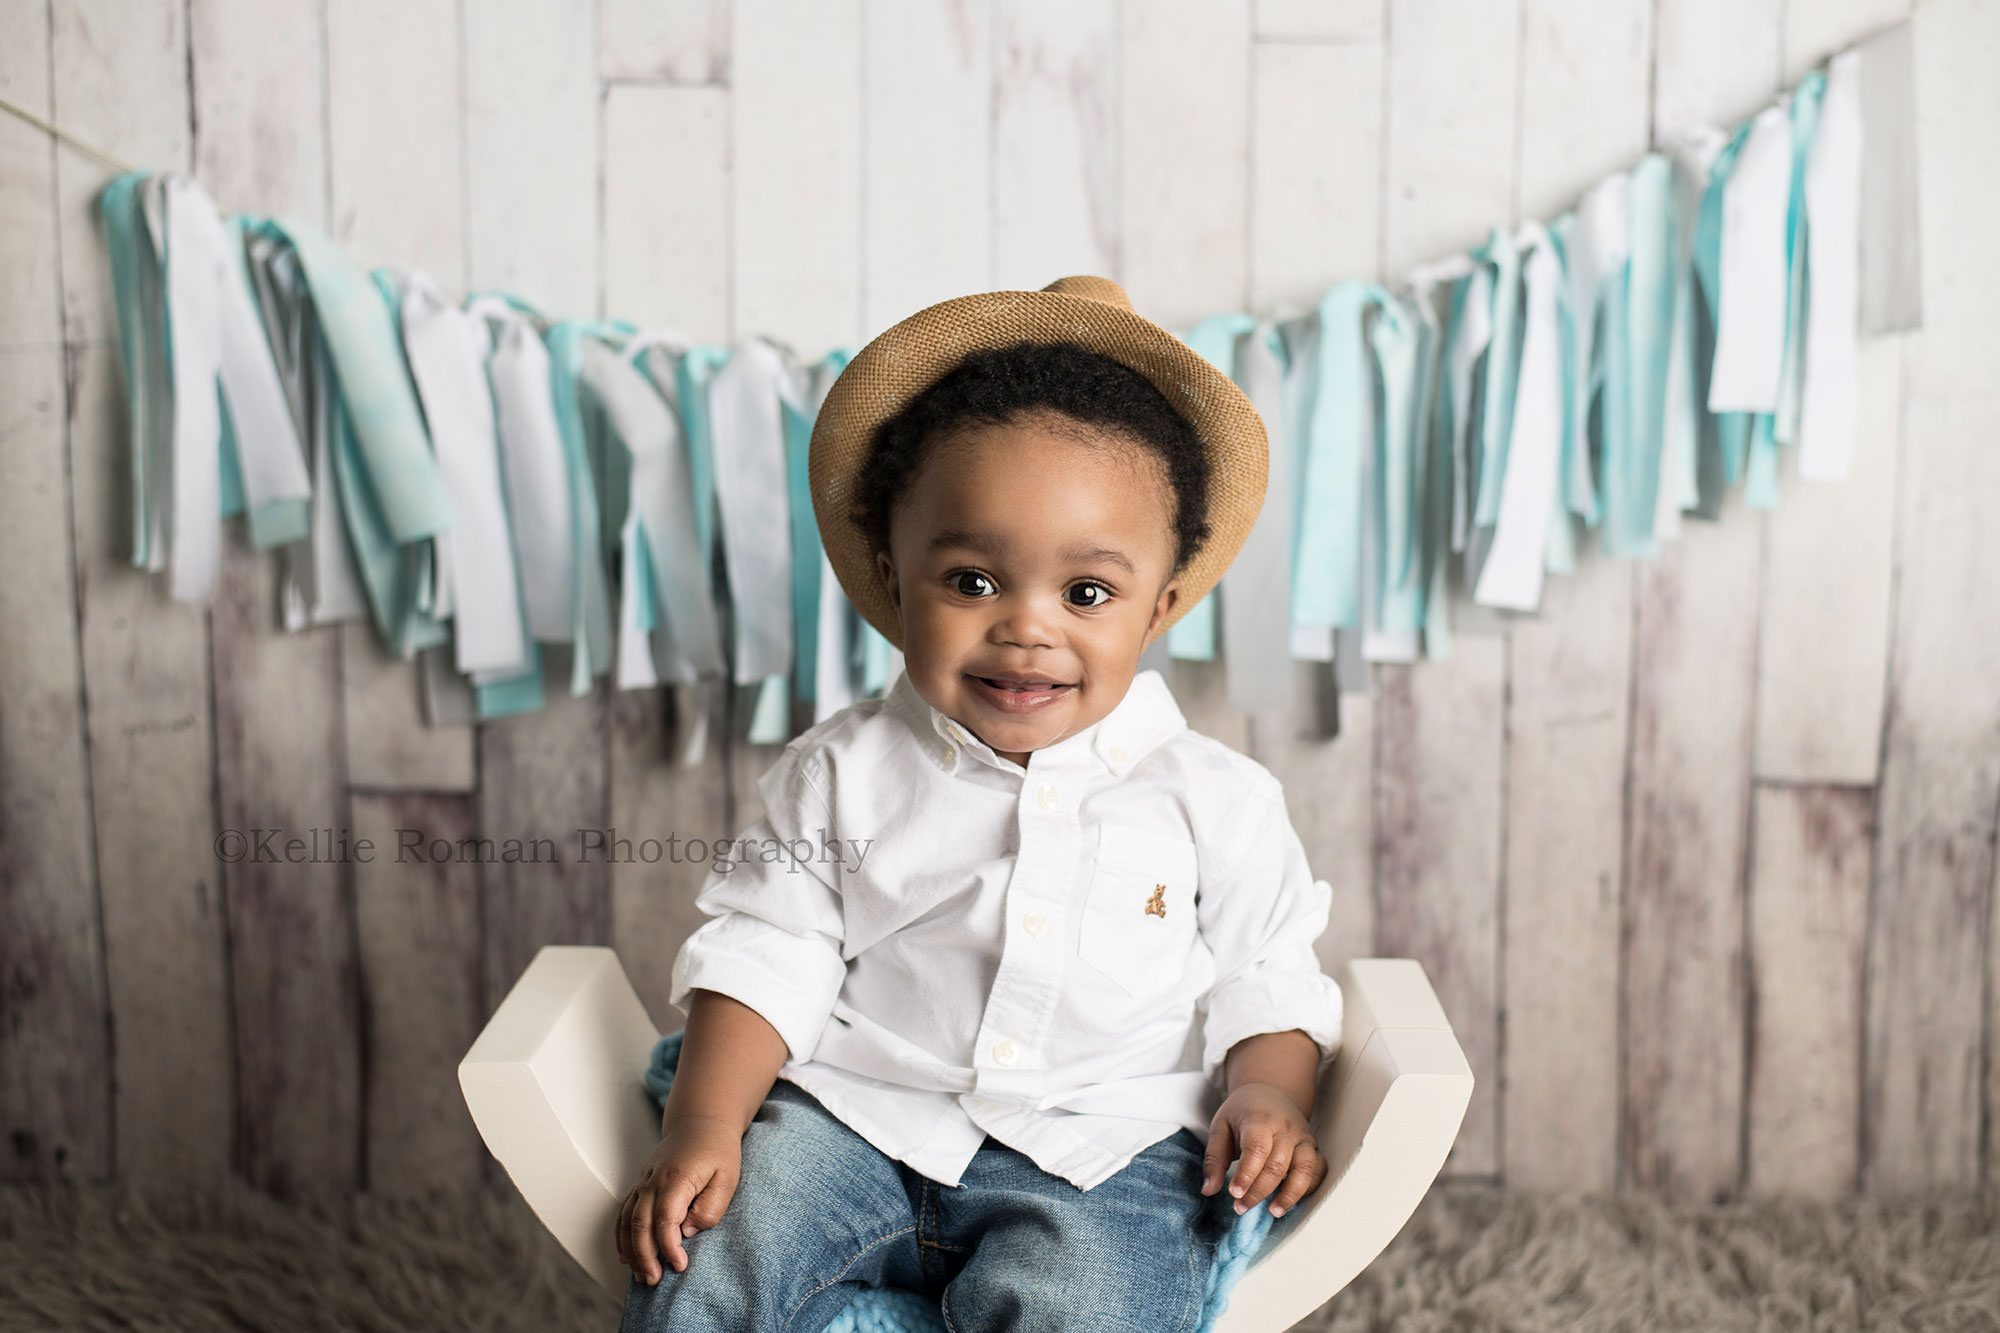 shades of blue cake smash one year old boy in a photography studio in Milwaukee sitting on a white curved bench he's wearing jeans and a white button up shirt with a hat smiling at the camera the backdrop is fake wood with a blue banner